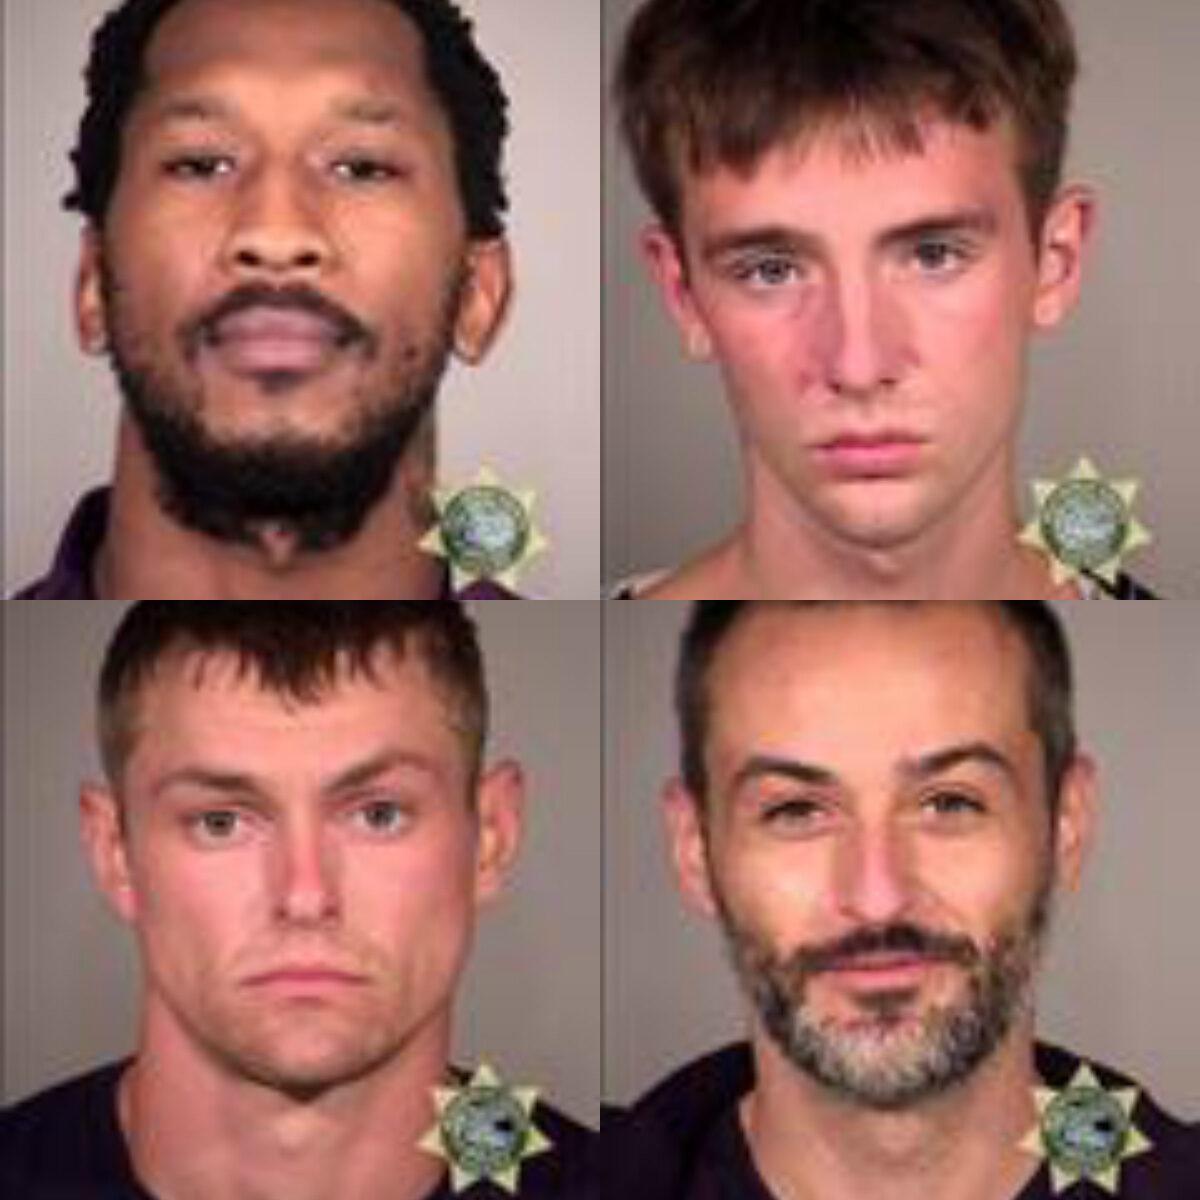 Demetrius Batchelo (top L), Enzo Zimmerman (top R), Ty Fox (bottom L), and Jawad Fakhuri (bottom R) were charged for participating in riots in Portland, Ore., on various dates this year. (Multnomah County Sheriff's Office)